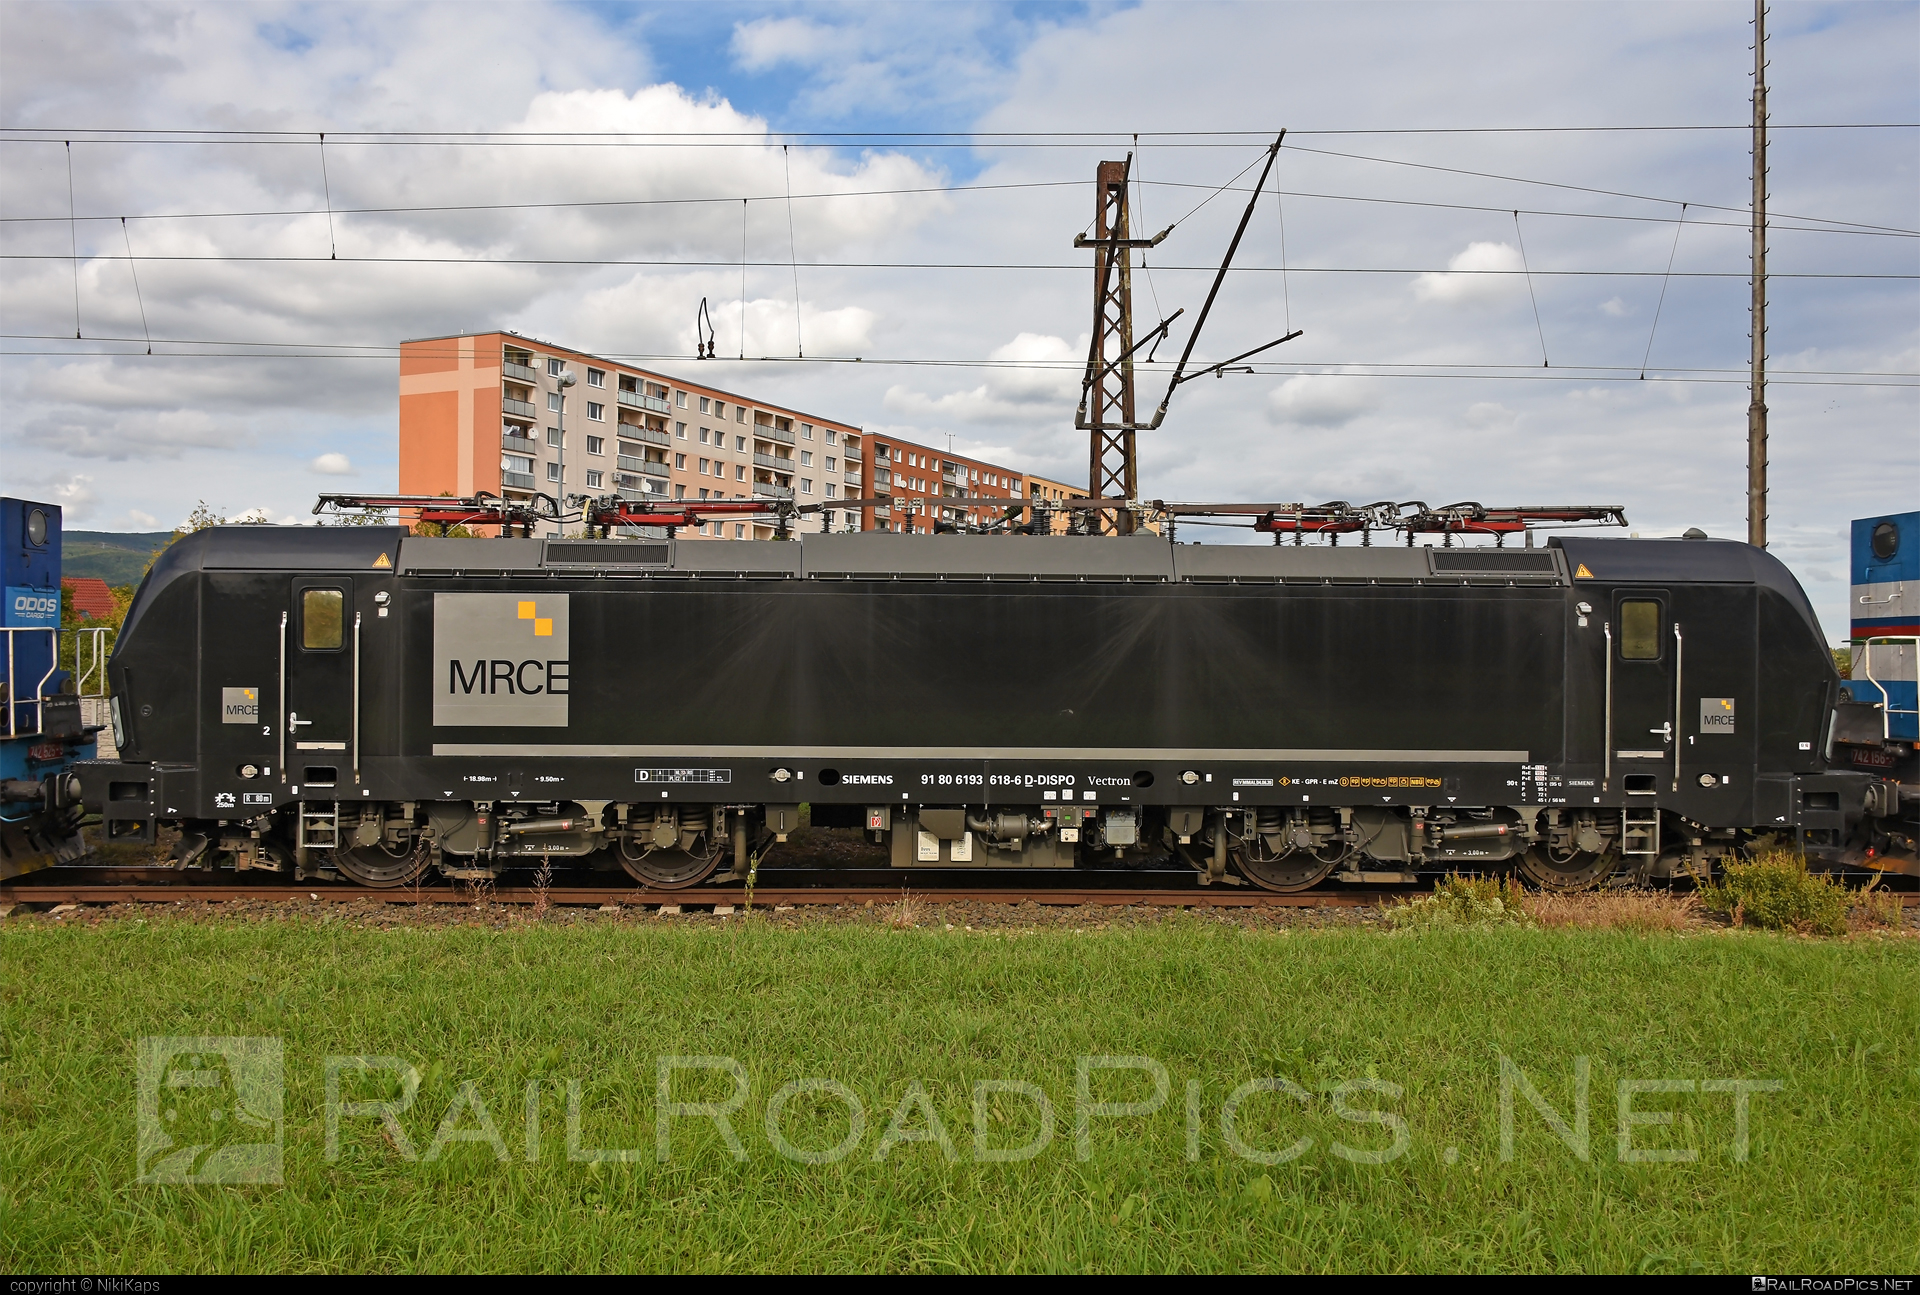 Siemens Vectron MS - 193 618 operated by Retrack Slovakia s. r. o. #dispolok #mitsuirailcapitaleurope #mitsuirailcapitaleuropegmbh #mrce #retrack #retrackslovakia #siemens #siemensVectron #siemensVectronMS #vectron #vectronMS